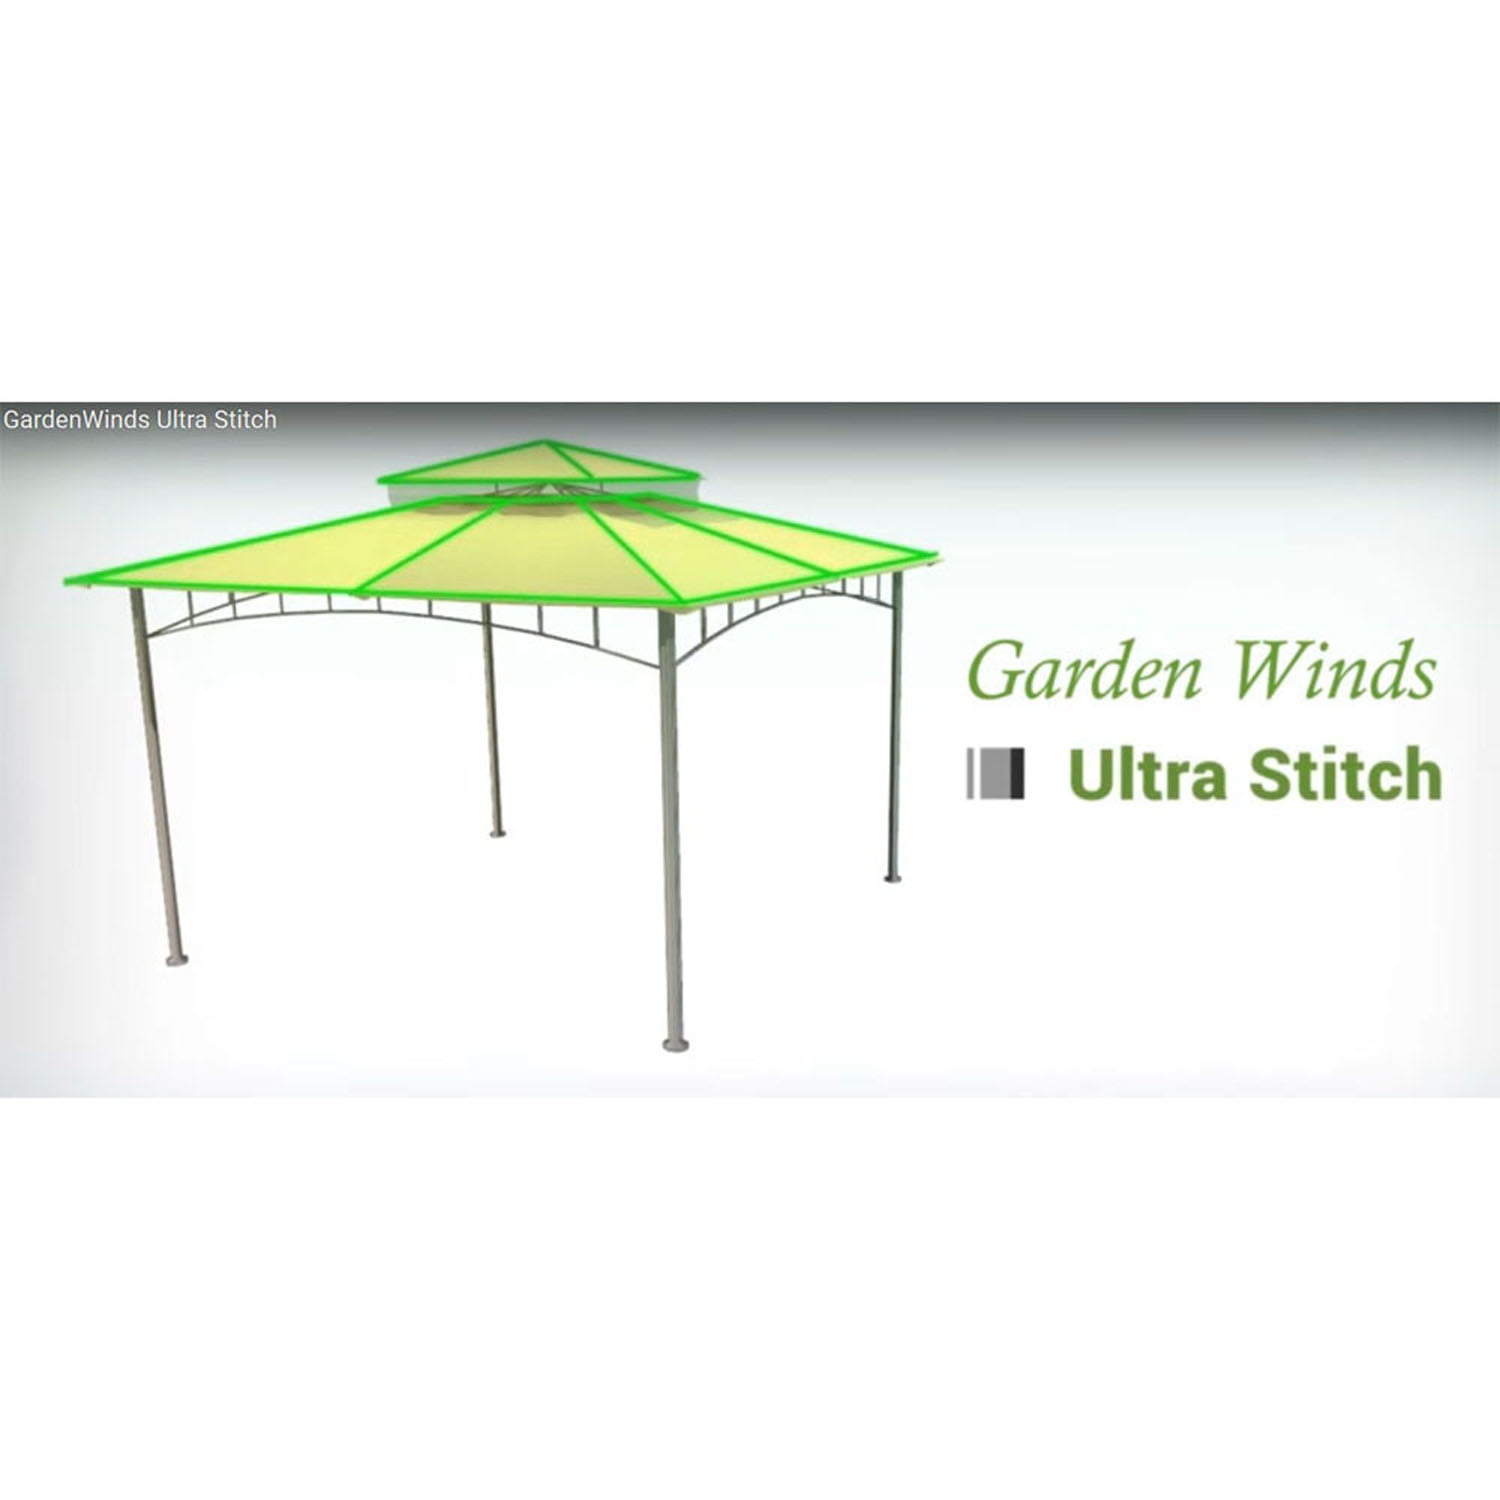 Standard 350 Garden Winds Replacement Canopy Top Cover for The Aldi Leaf Gazebo